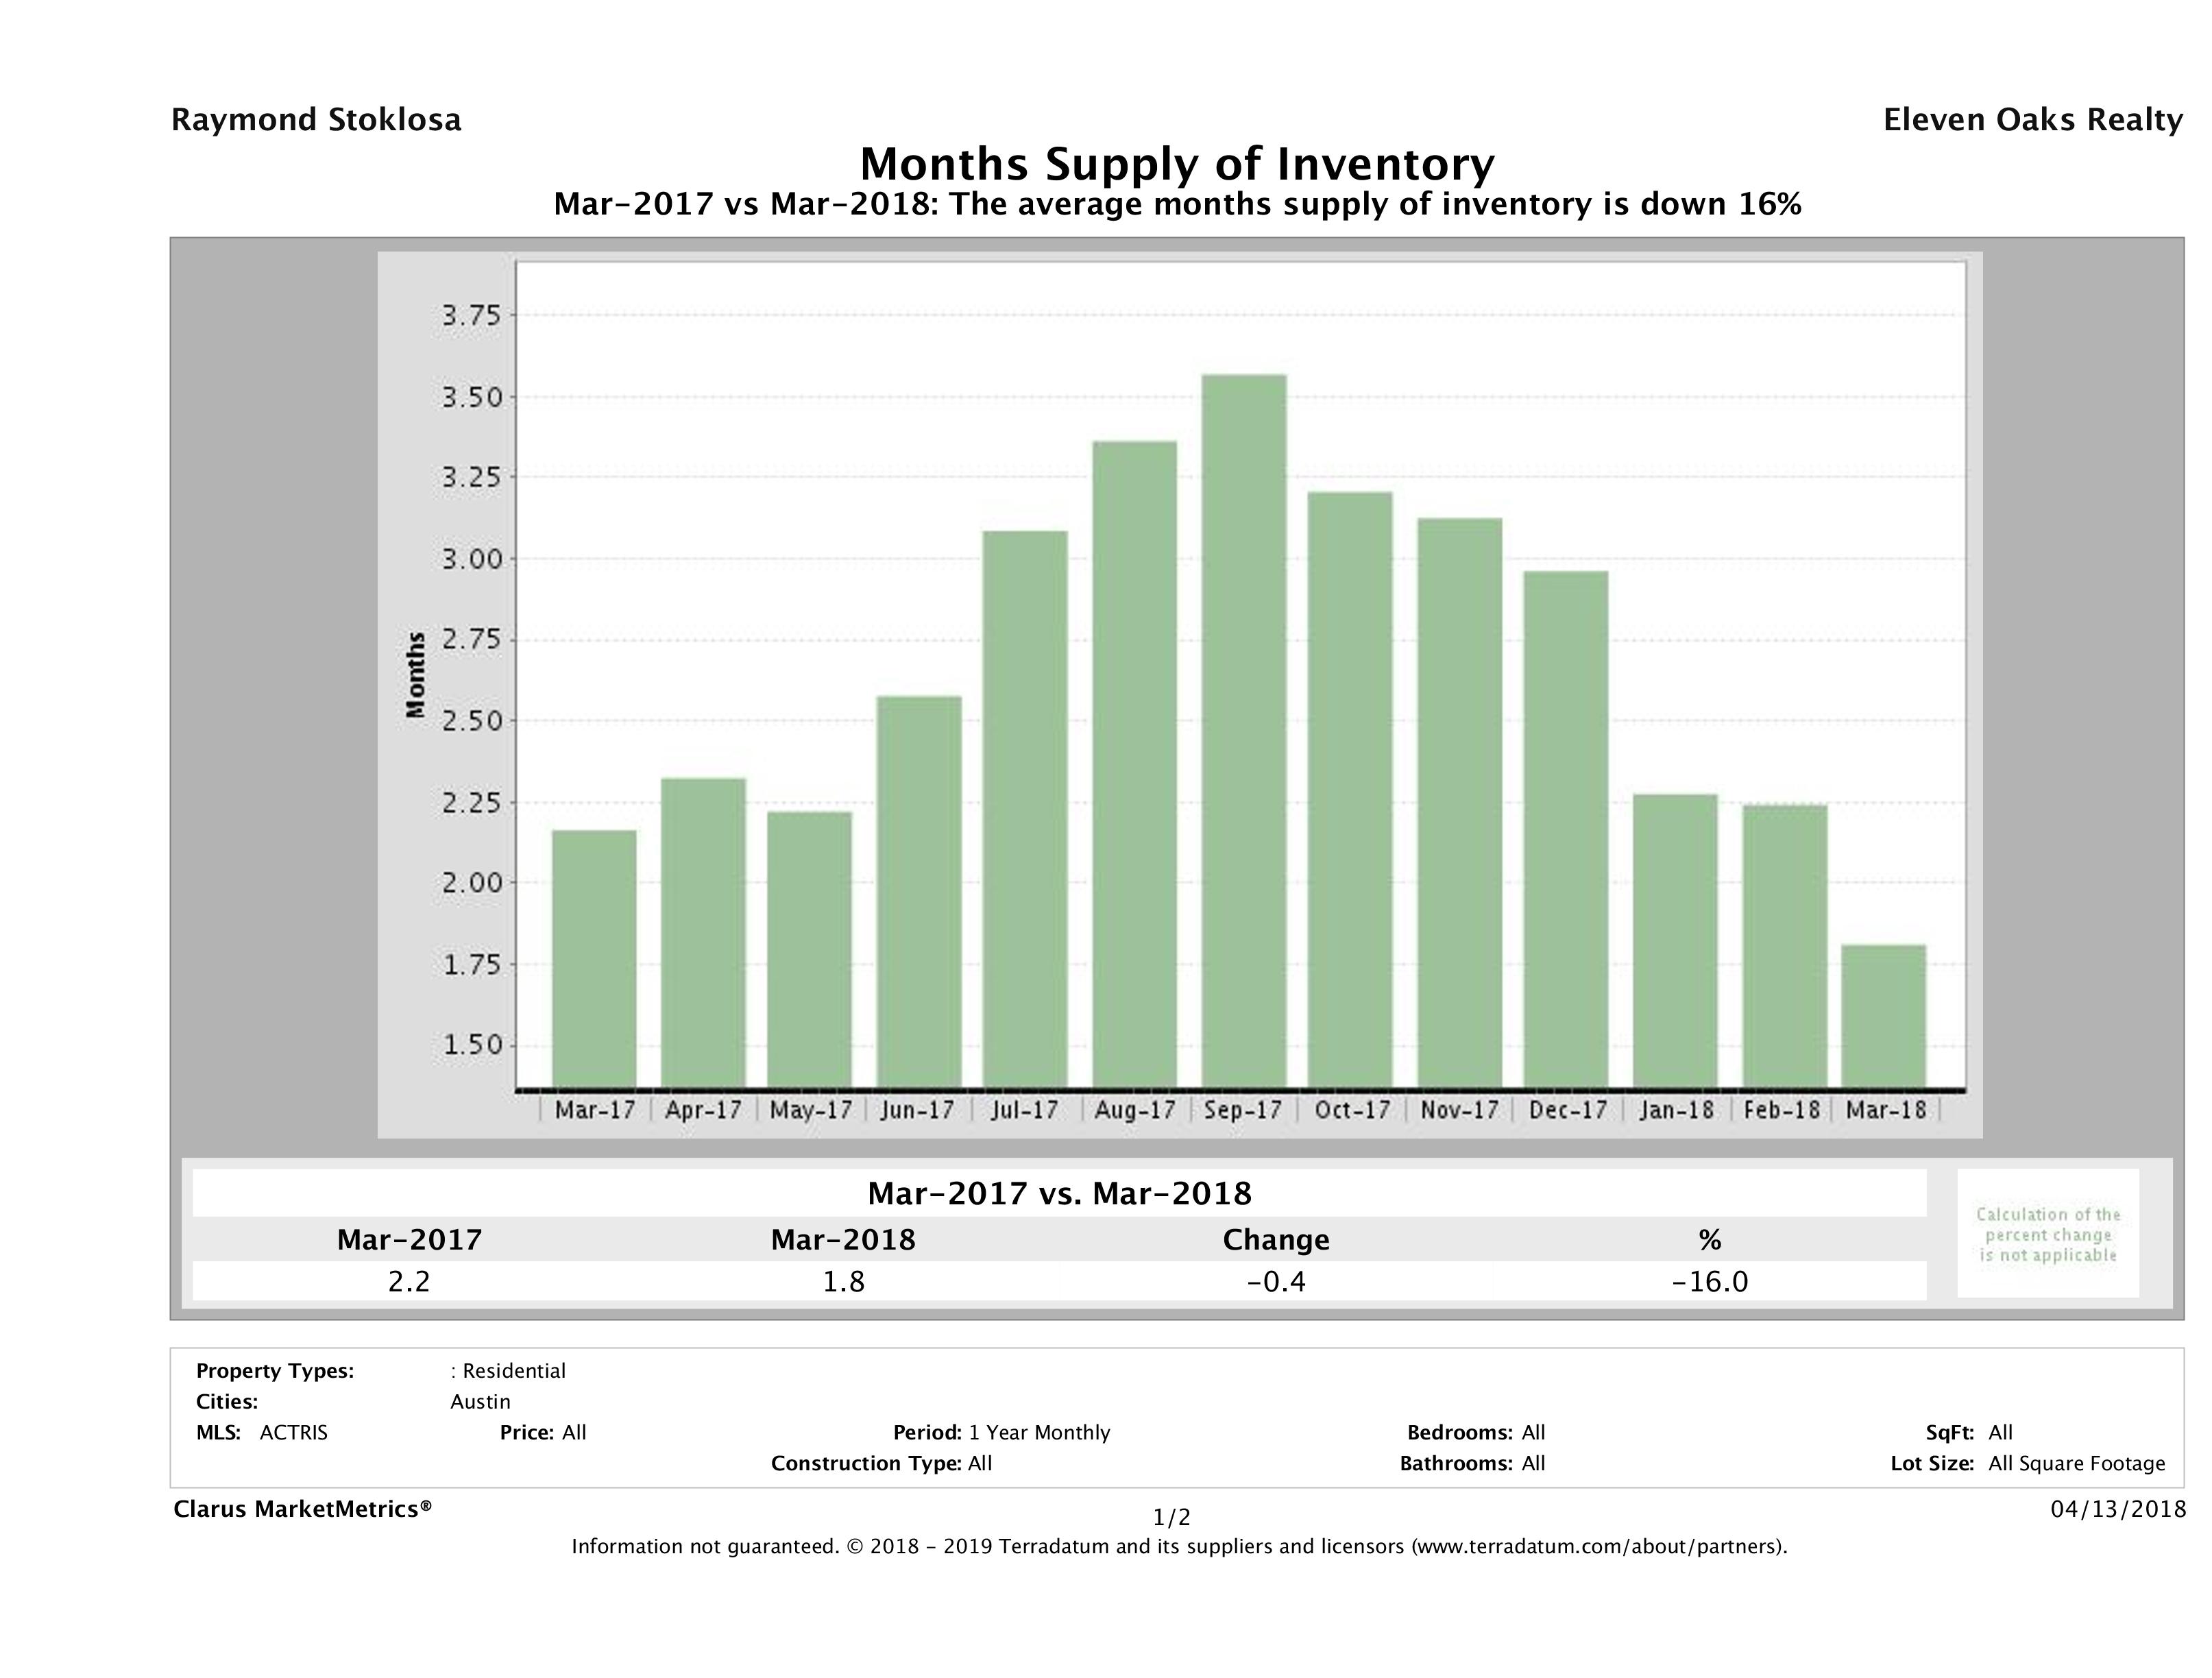 Austin single family home months inventory March 2018